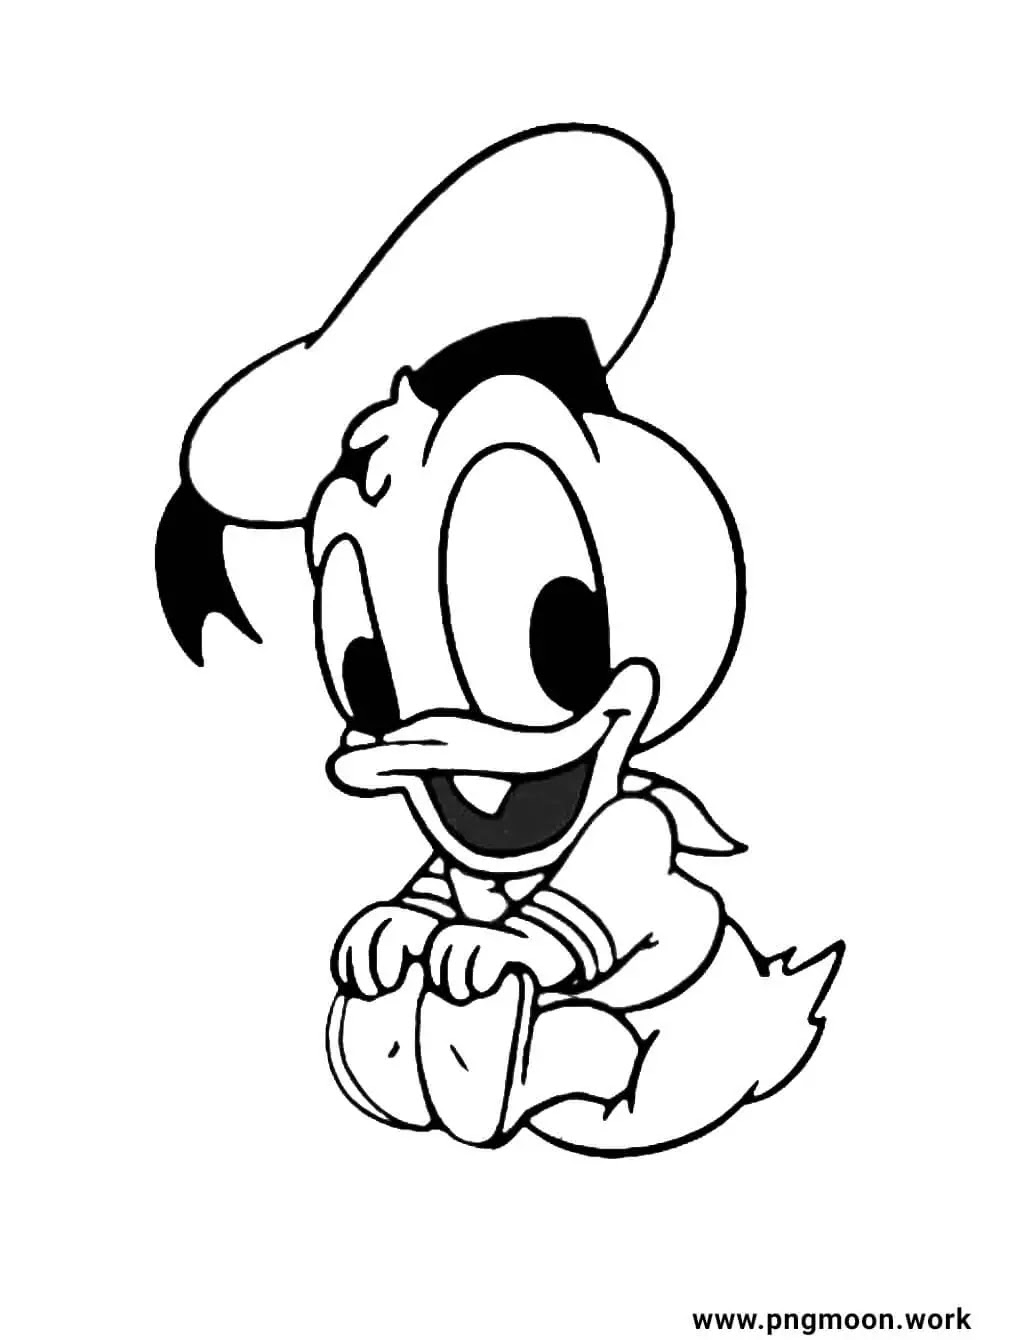 Donald Duck Coloring Pages   Pngmoon  PNG images, Coloring Pages